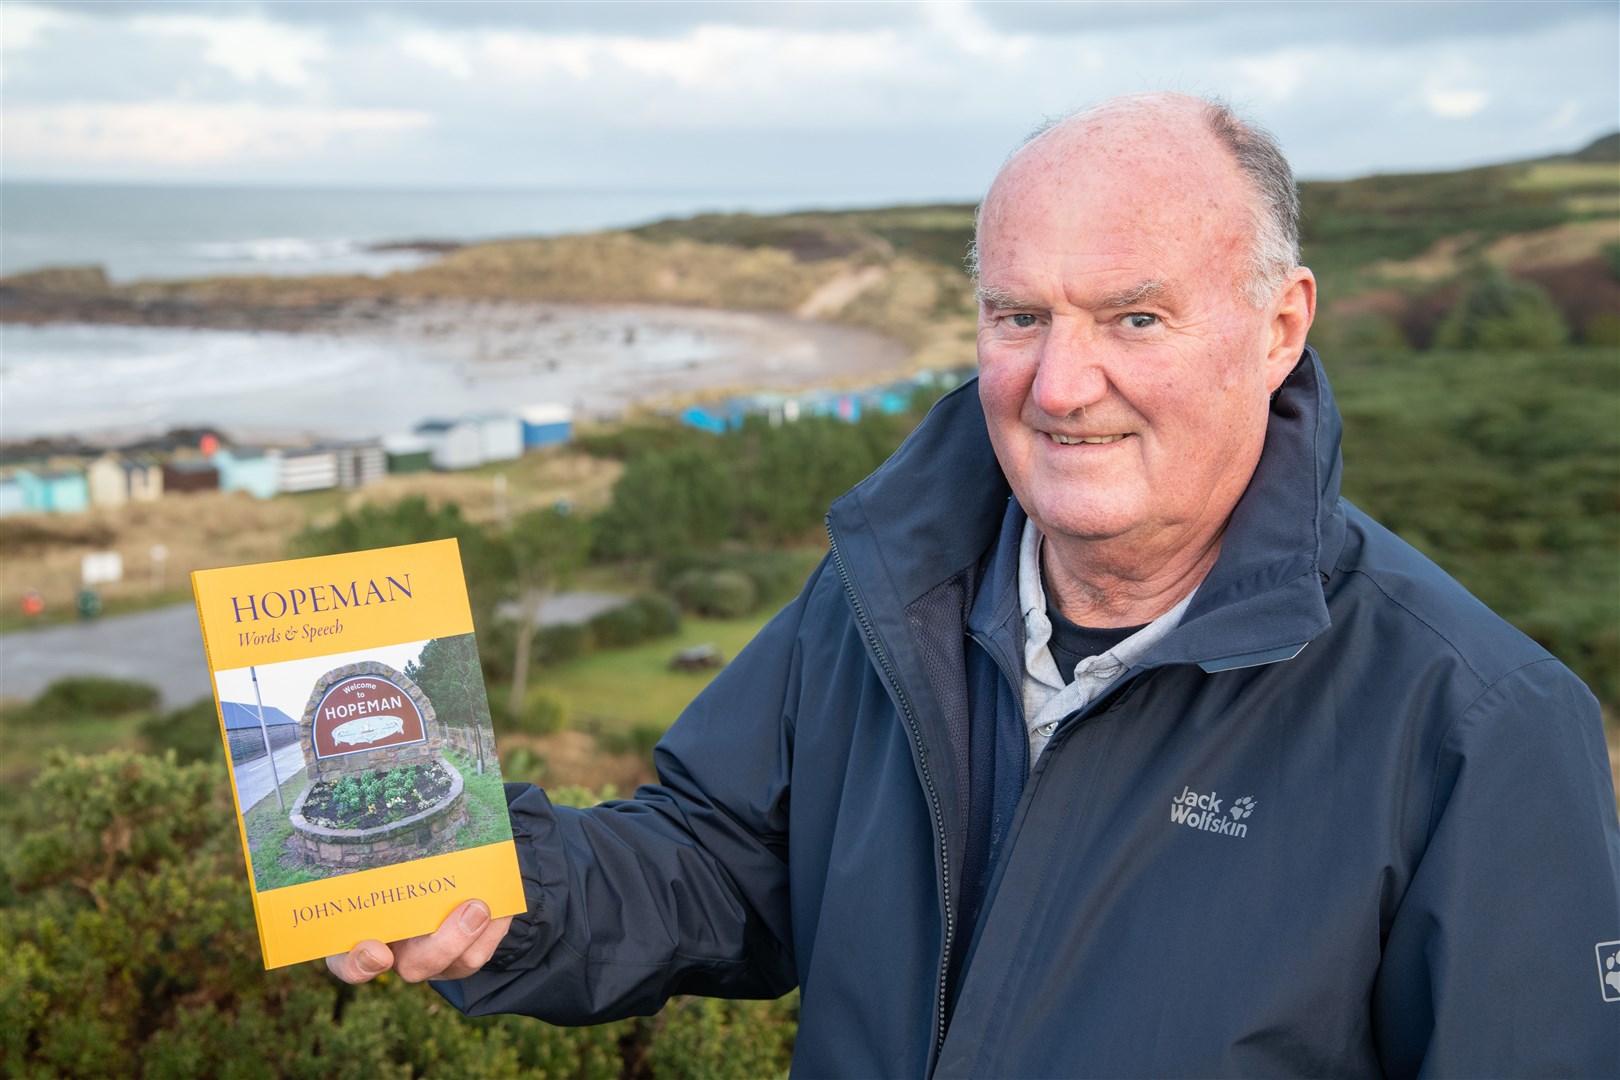 John McPherson's book looks at how local doric has developed over the past 200 years. Picture: Daniel Forsyth.